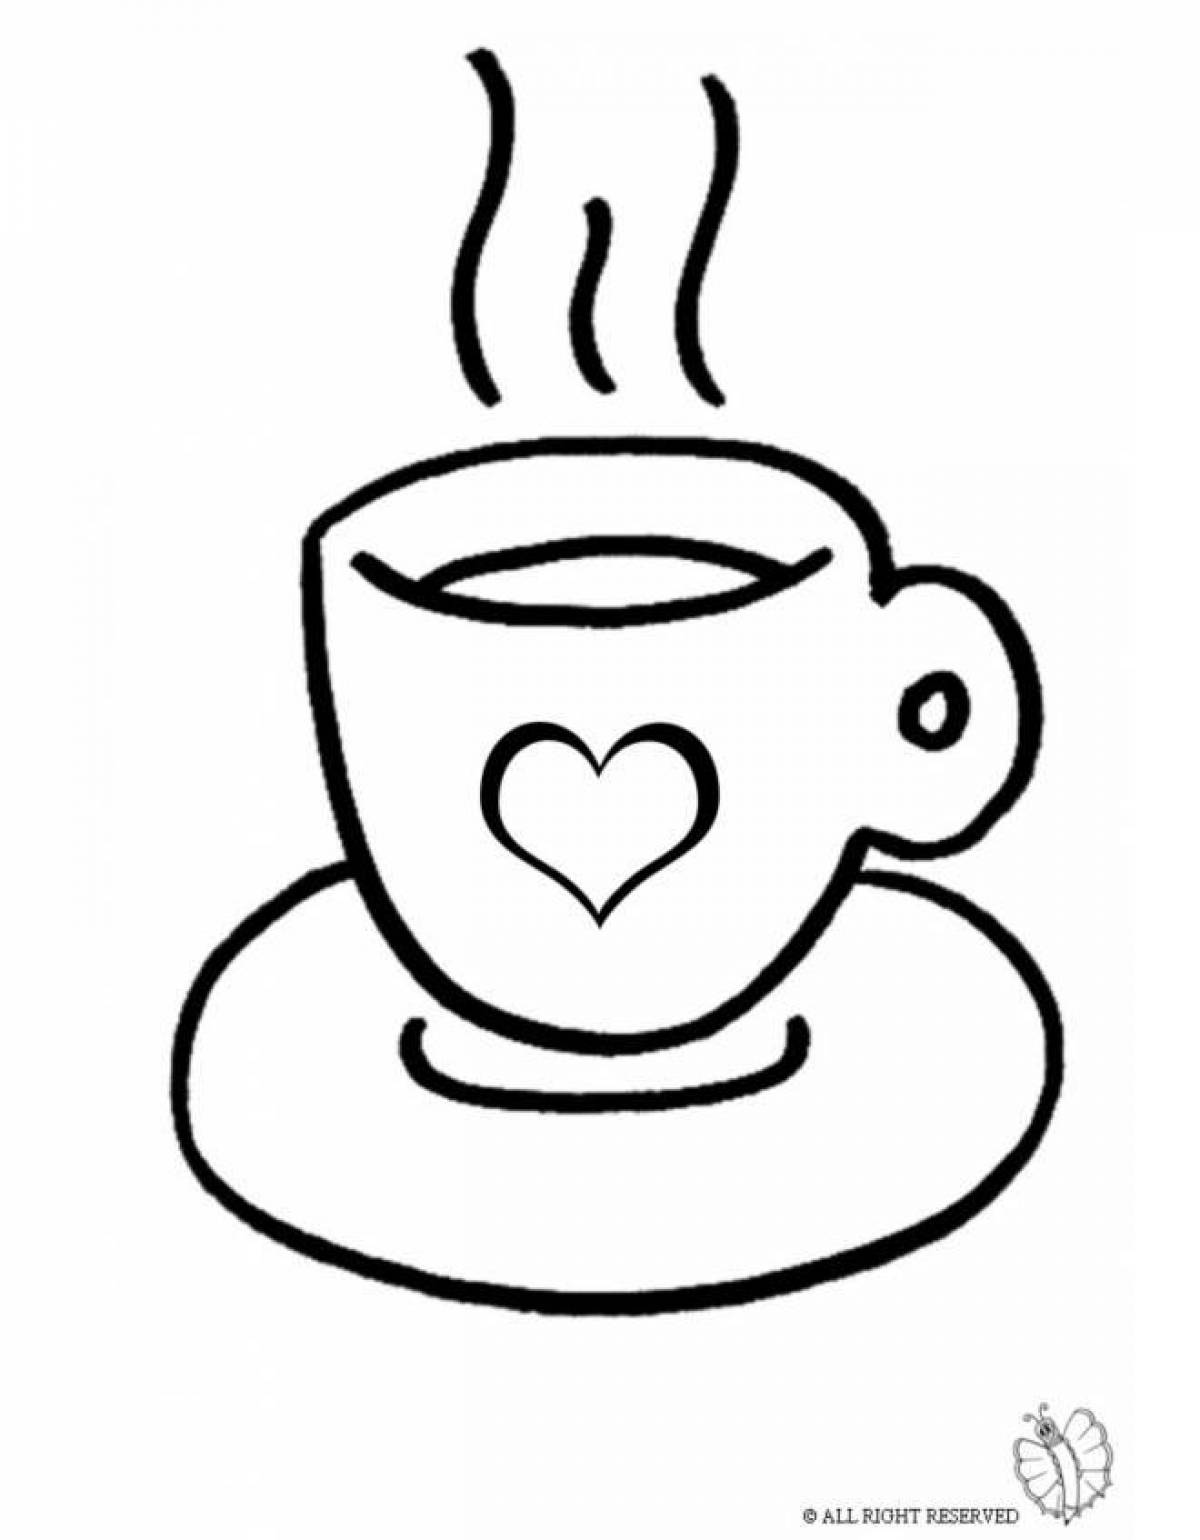 Serene tea coloring page